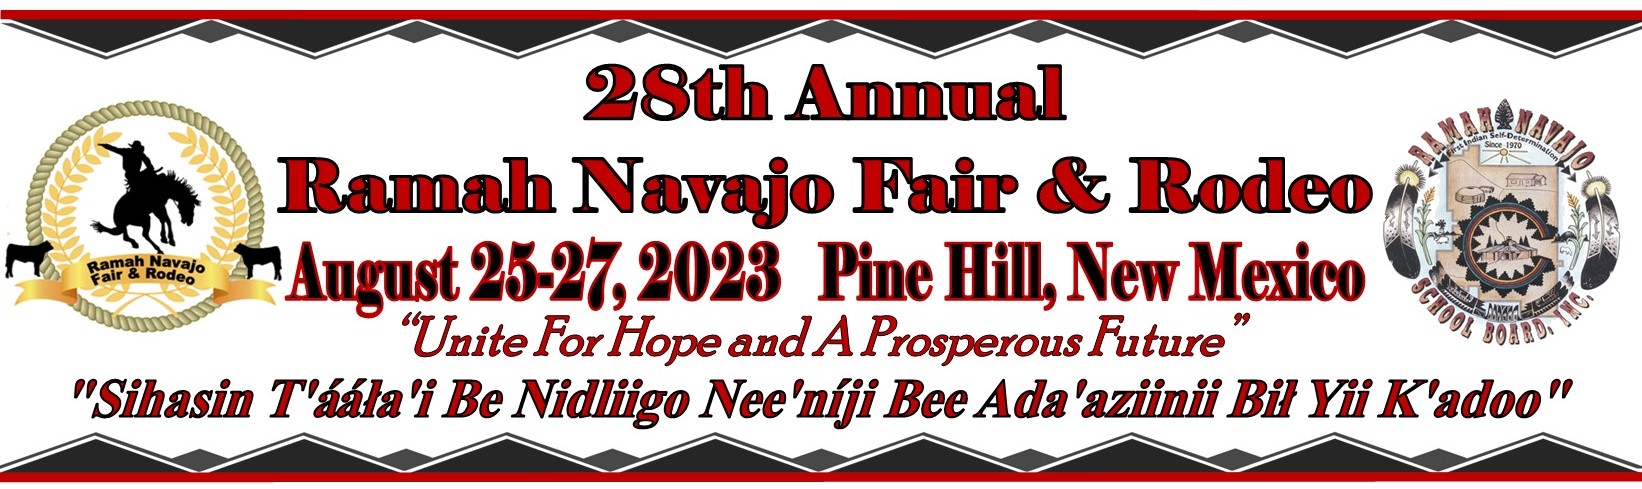 Pine Hill Fair and Rodeo 